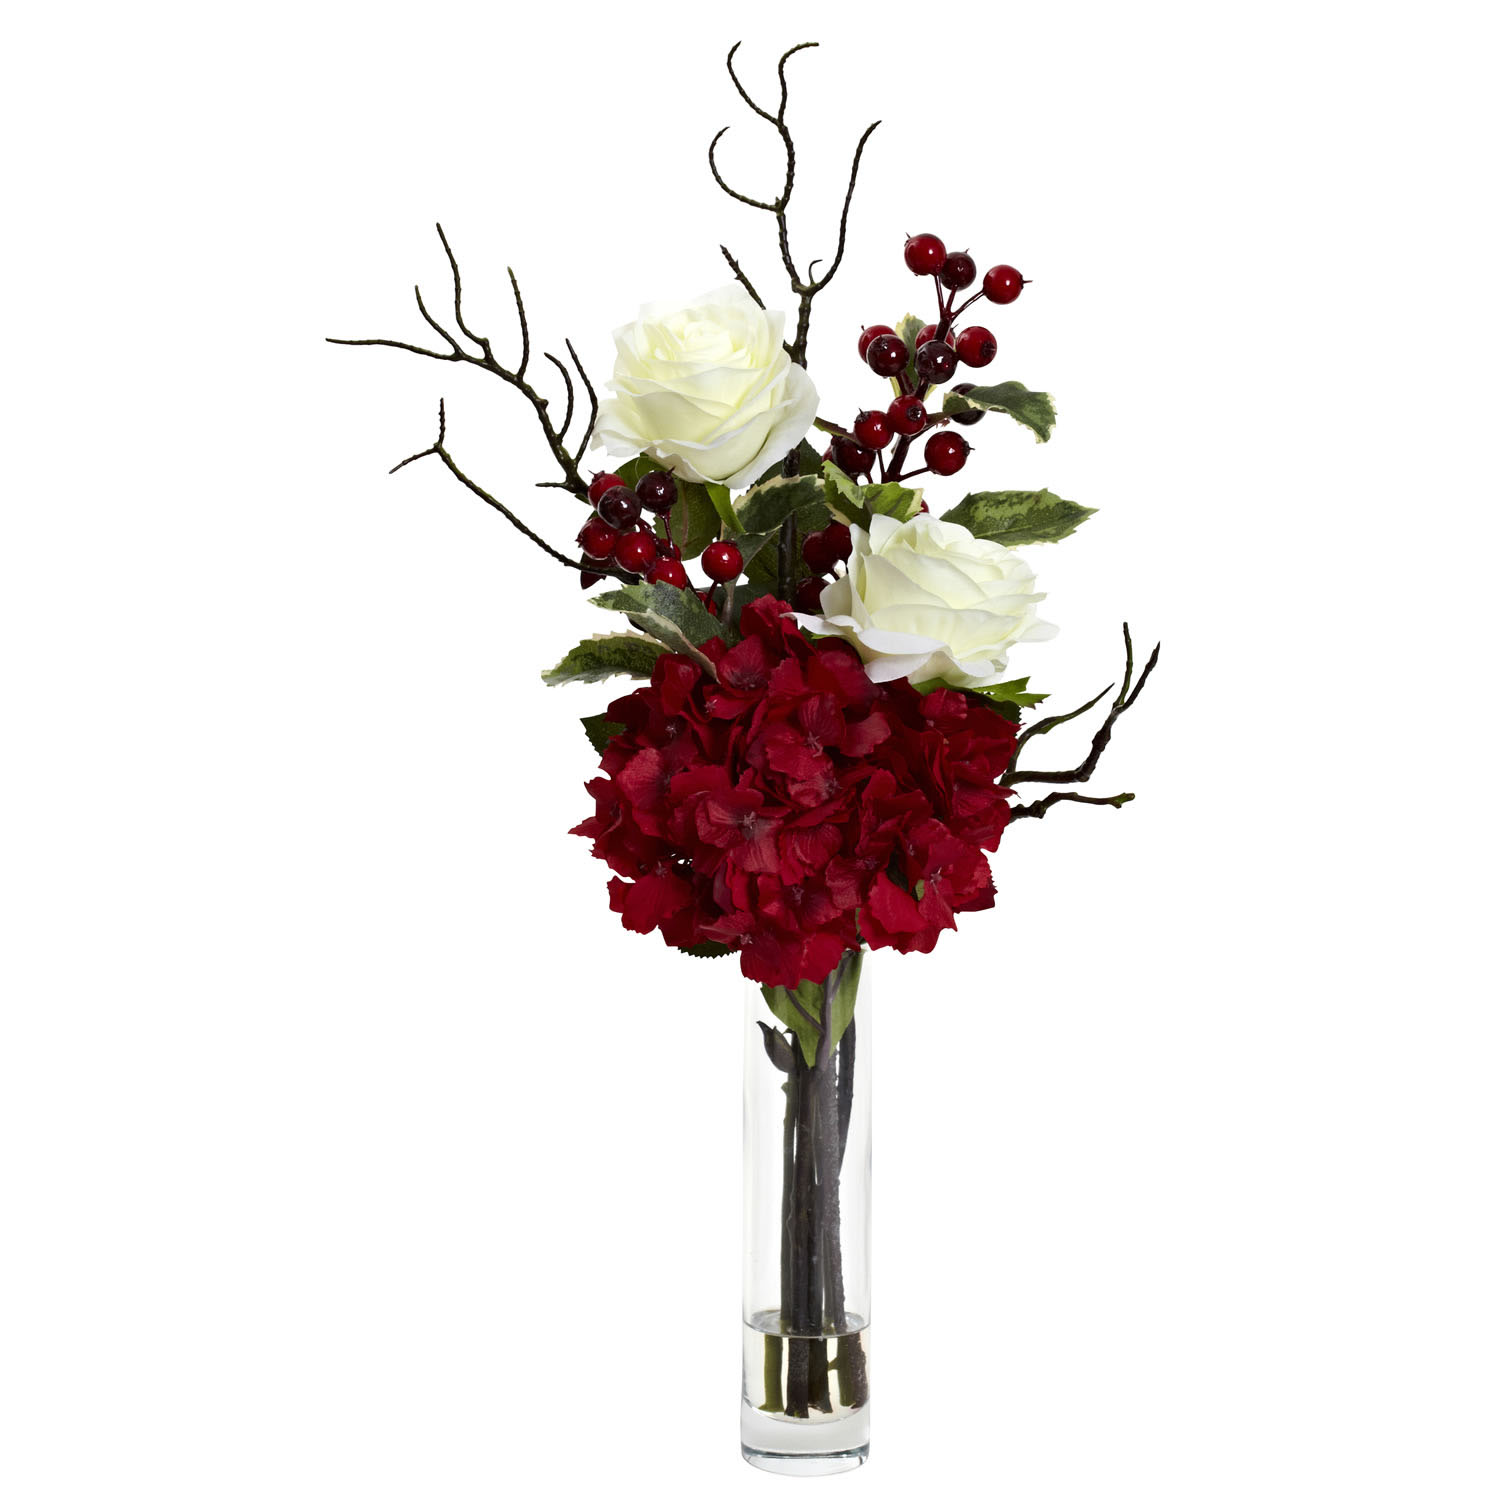 19.5 Inch Holly Berry/rose/hydrangea Holiday Arrangement In Glass Vase